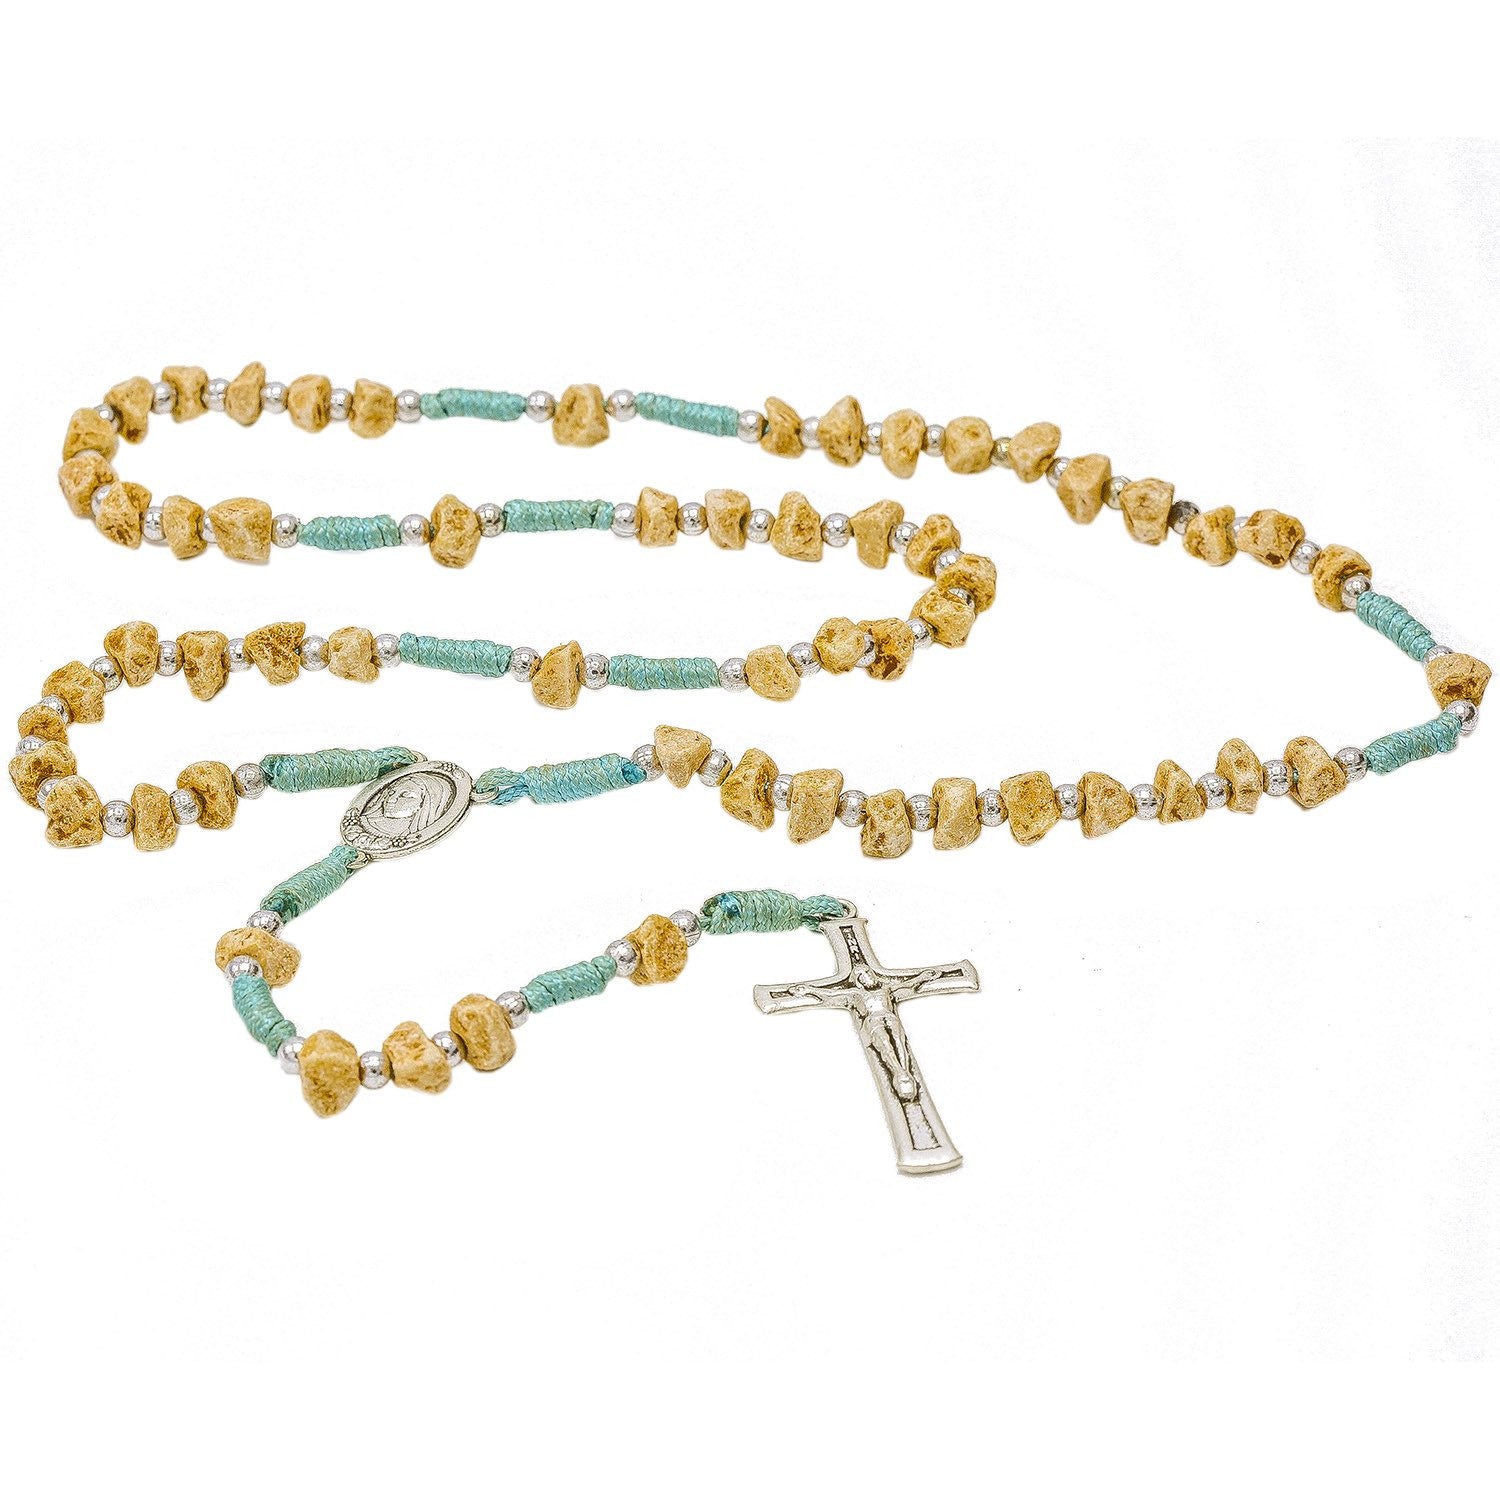 Handmade Medjugorje light Blue Cord Rosary Our Lady of Medjugorje Center Piece and Crucifix